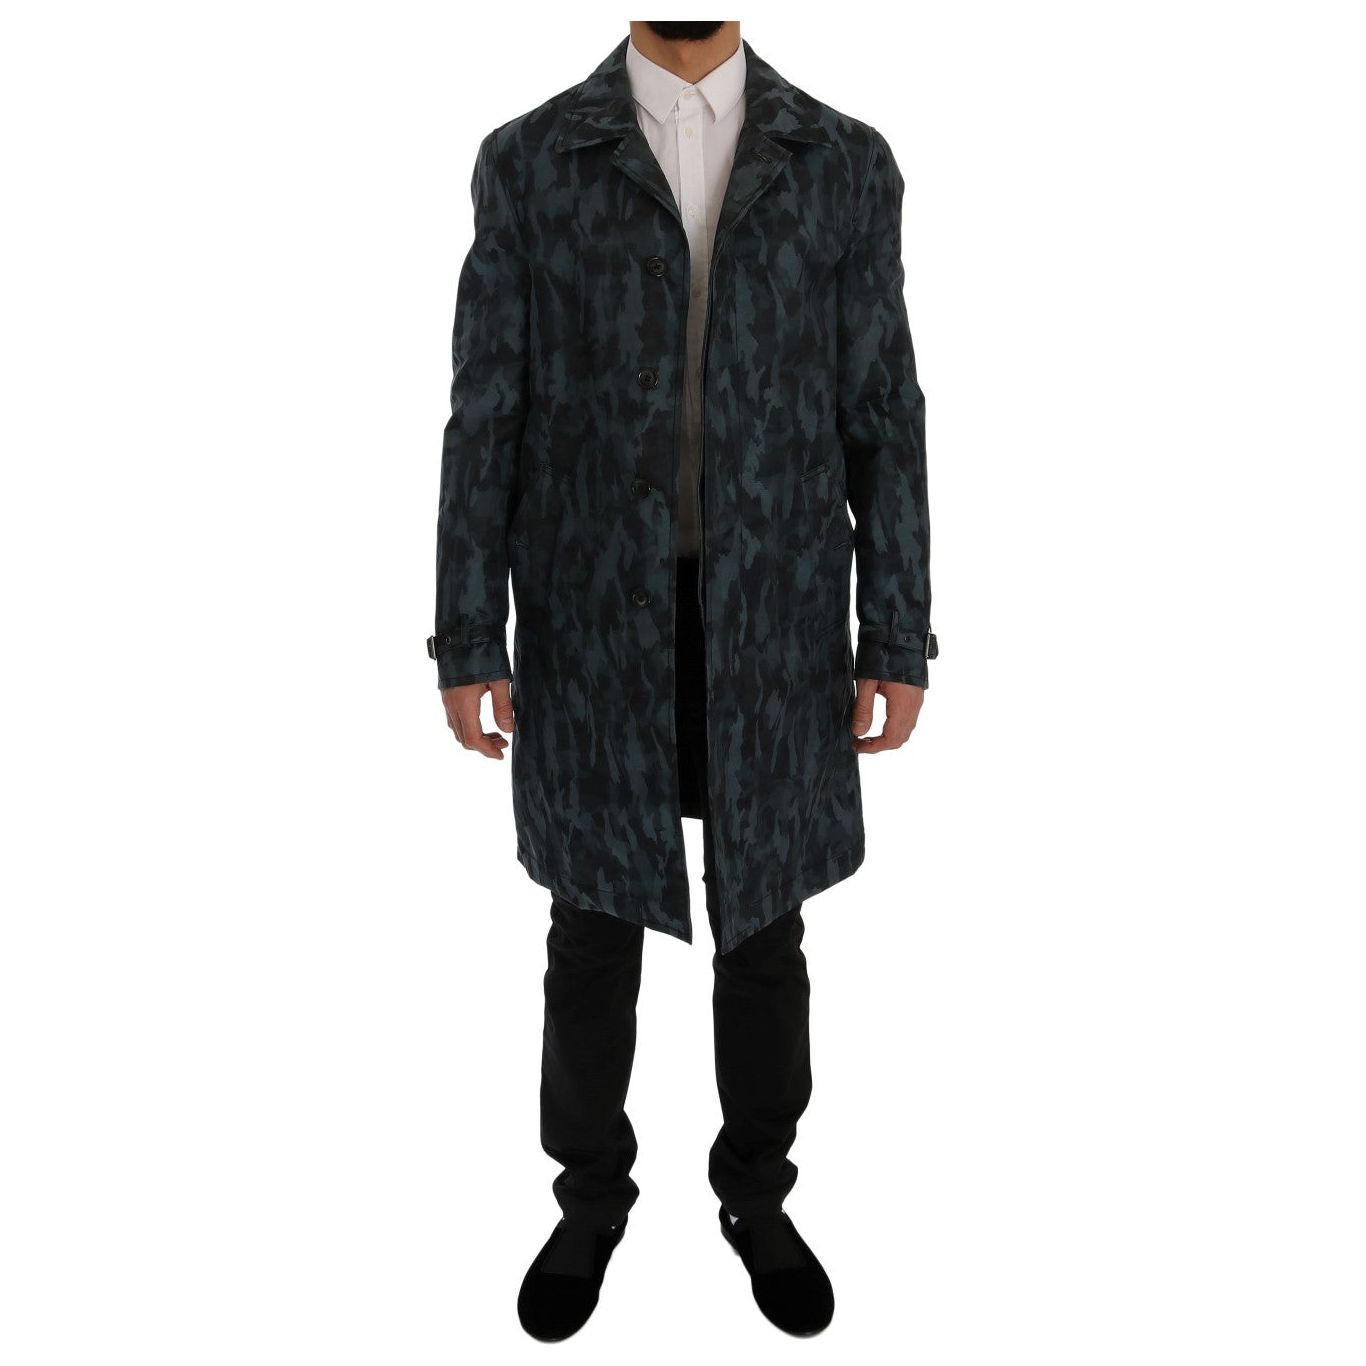 Dolce & Gabbana Blue Camouflage Trench Coat Elegance Coats & Jackets blue-camouflage-trench-trench